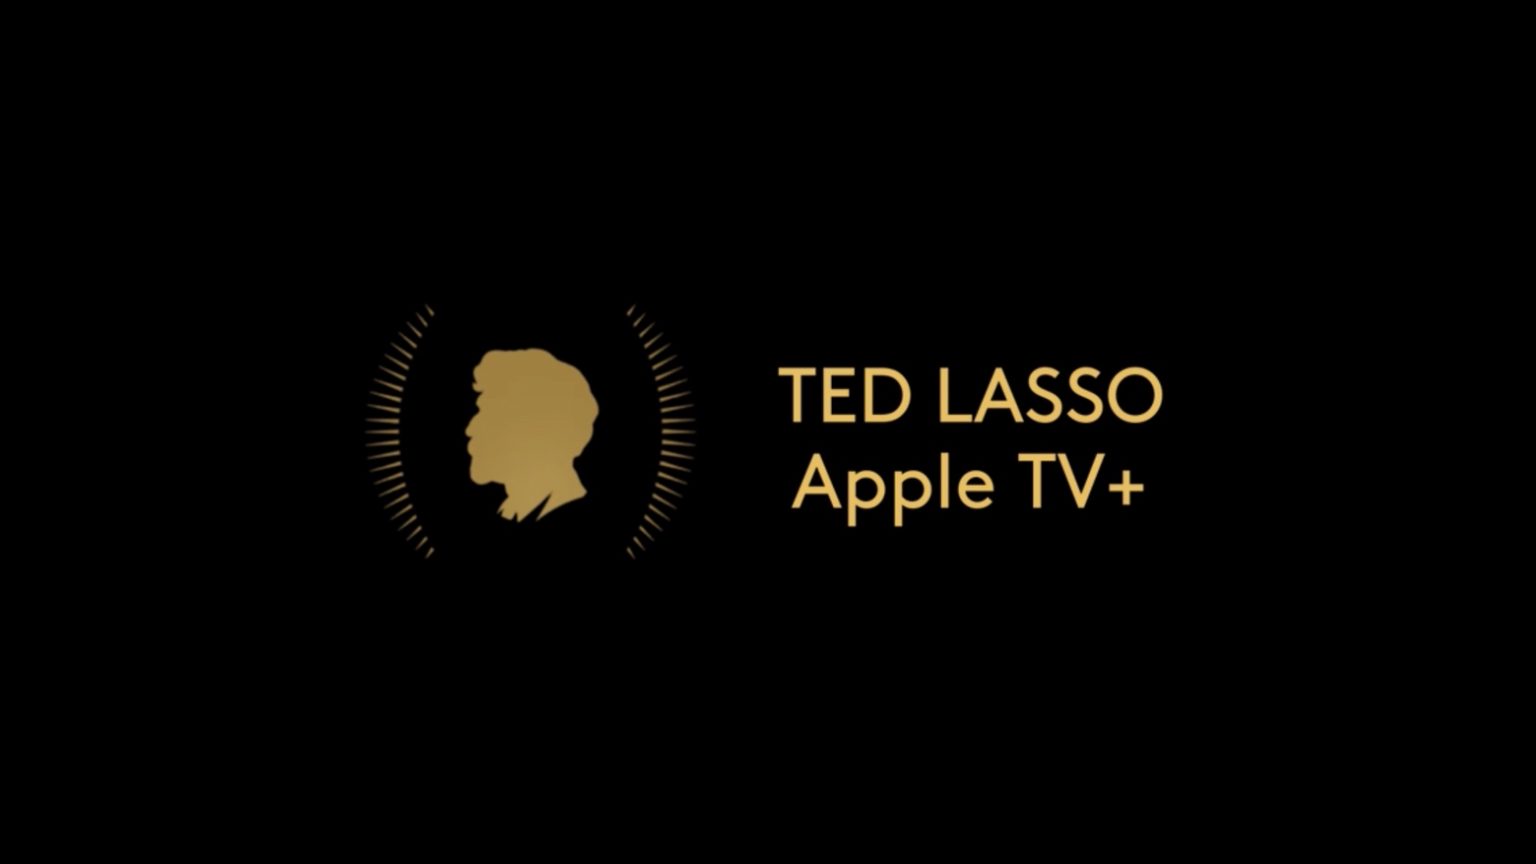 ‘Ted Lasso’ scores a Peabody Award for countering toxic masculinity